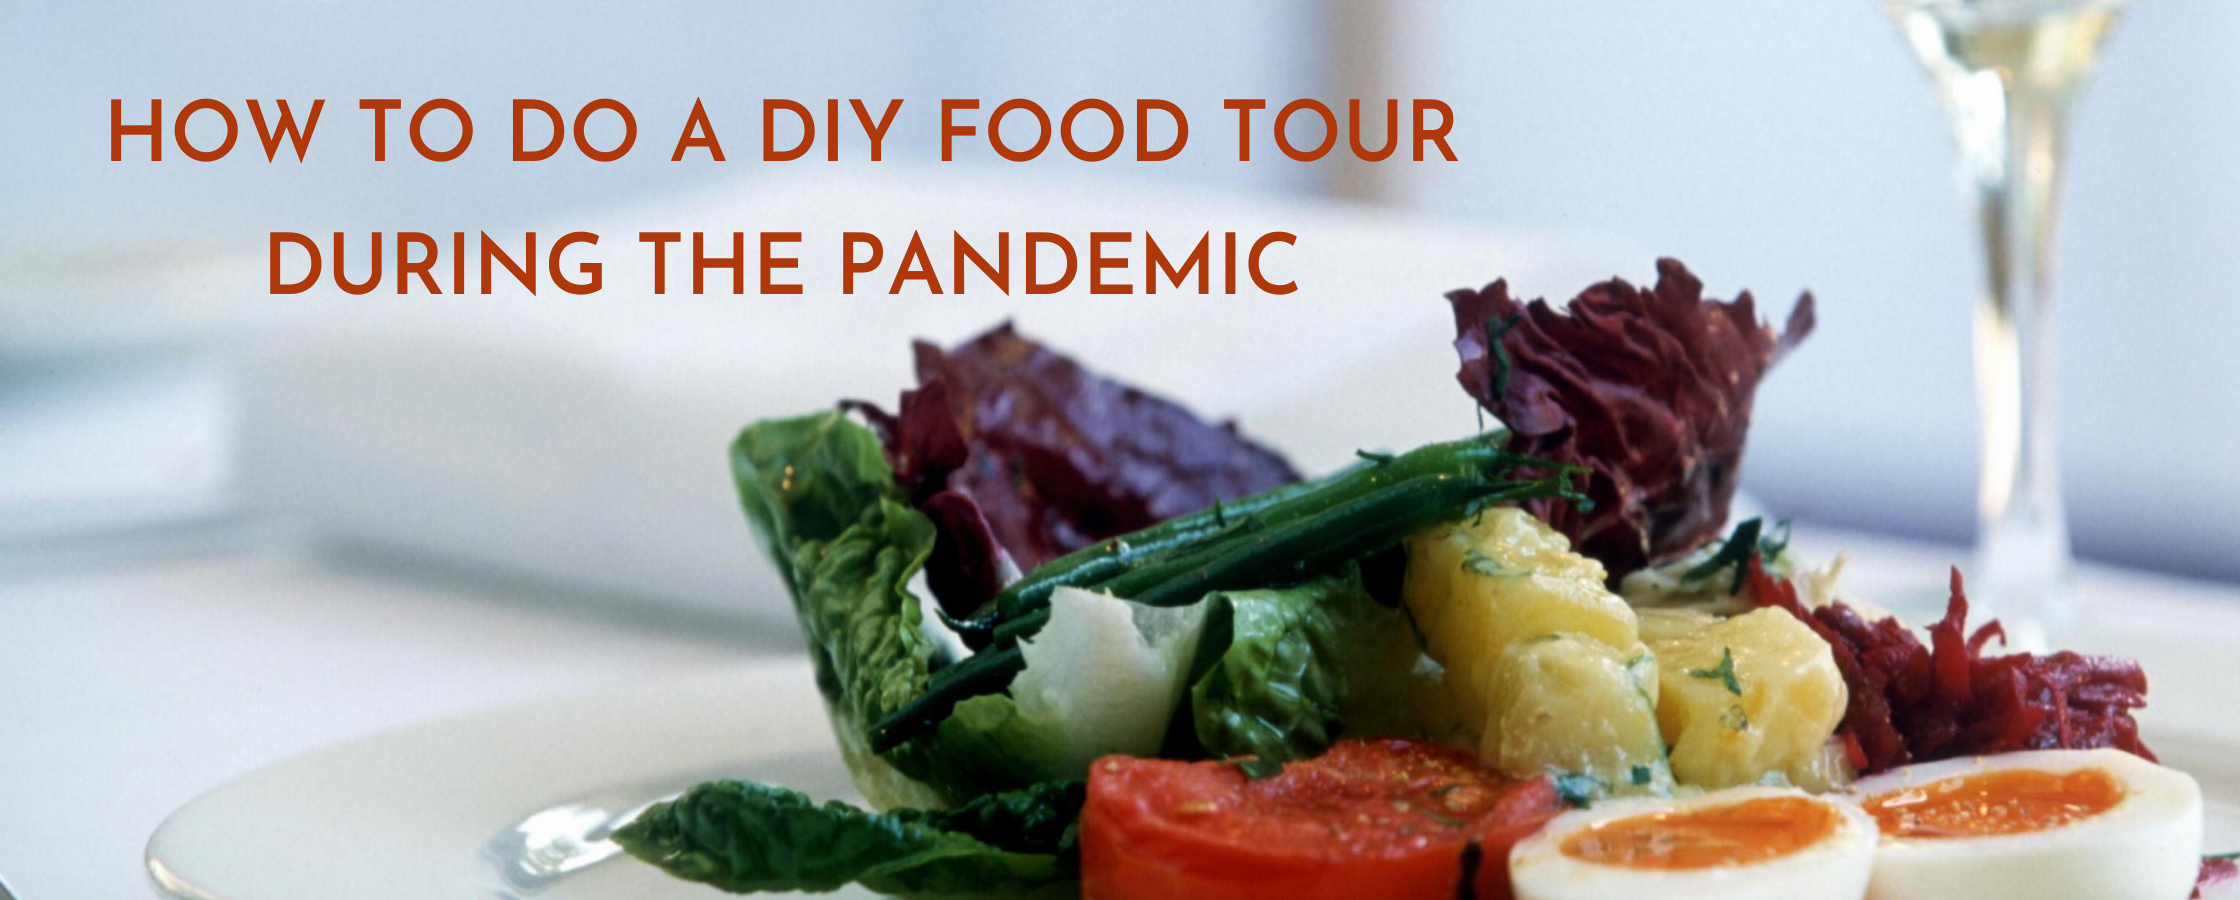 How to do a DIY Food Tour during a Pandemic